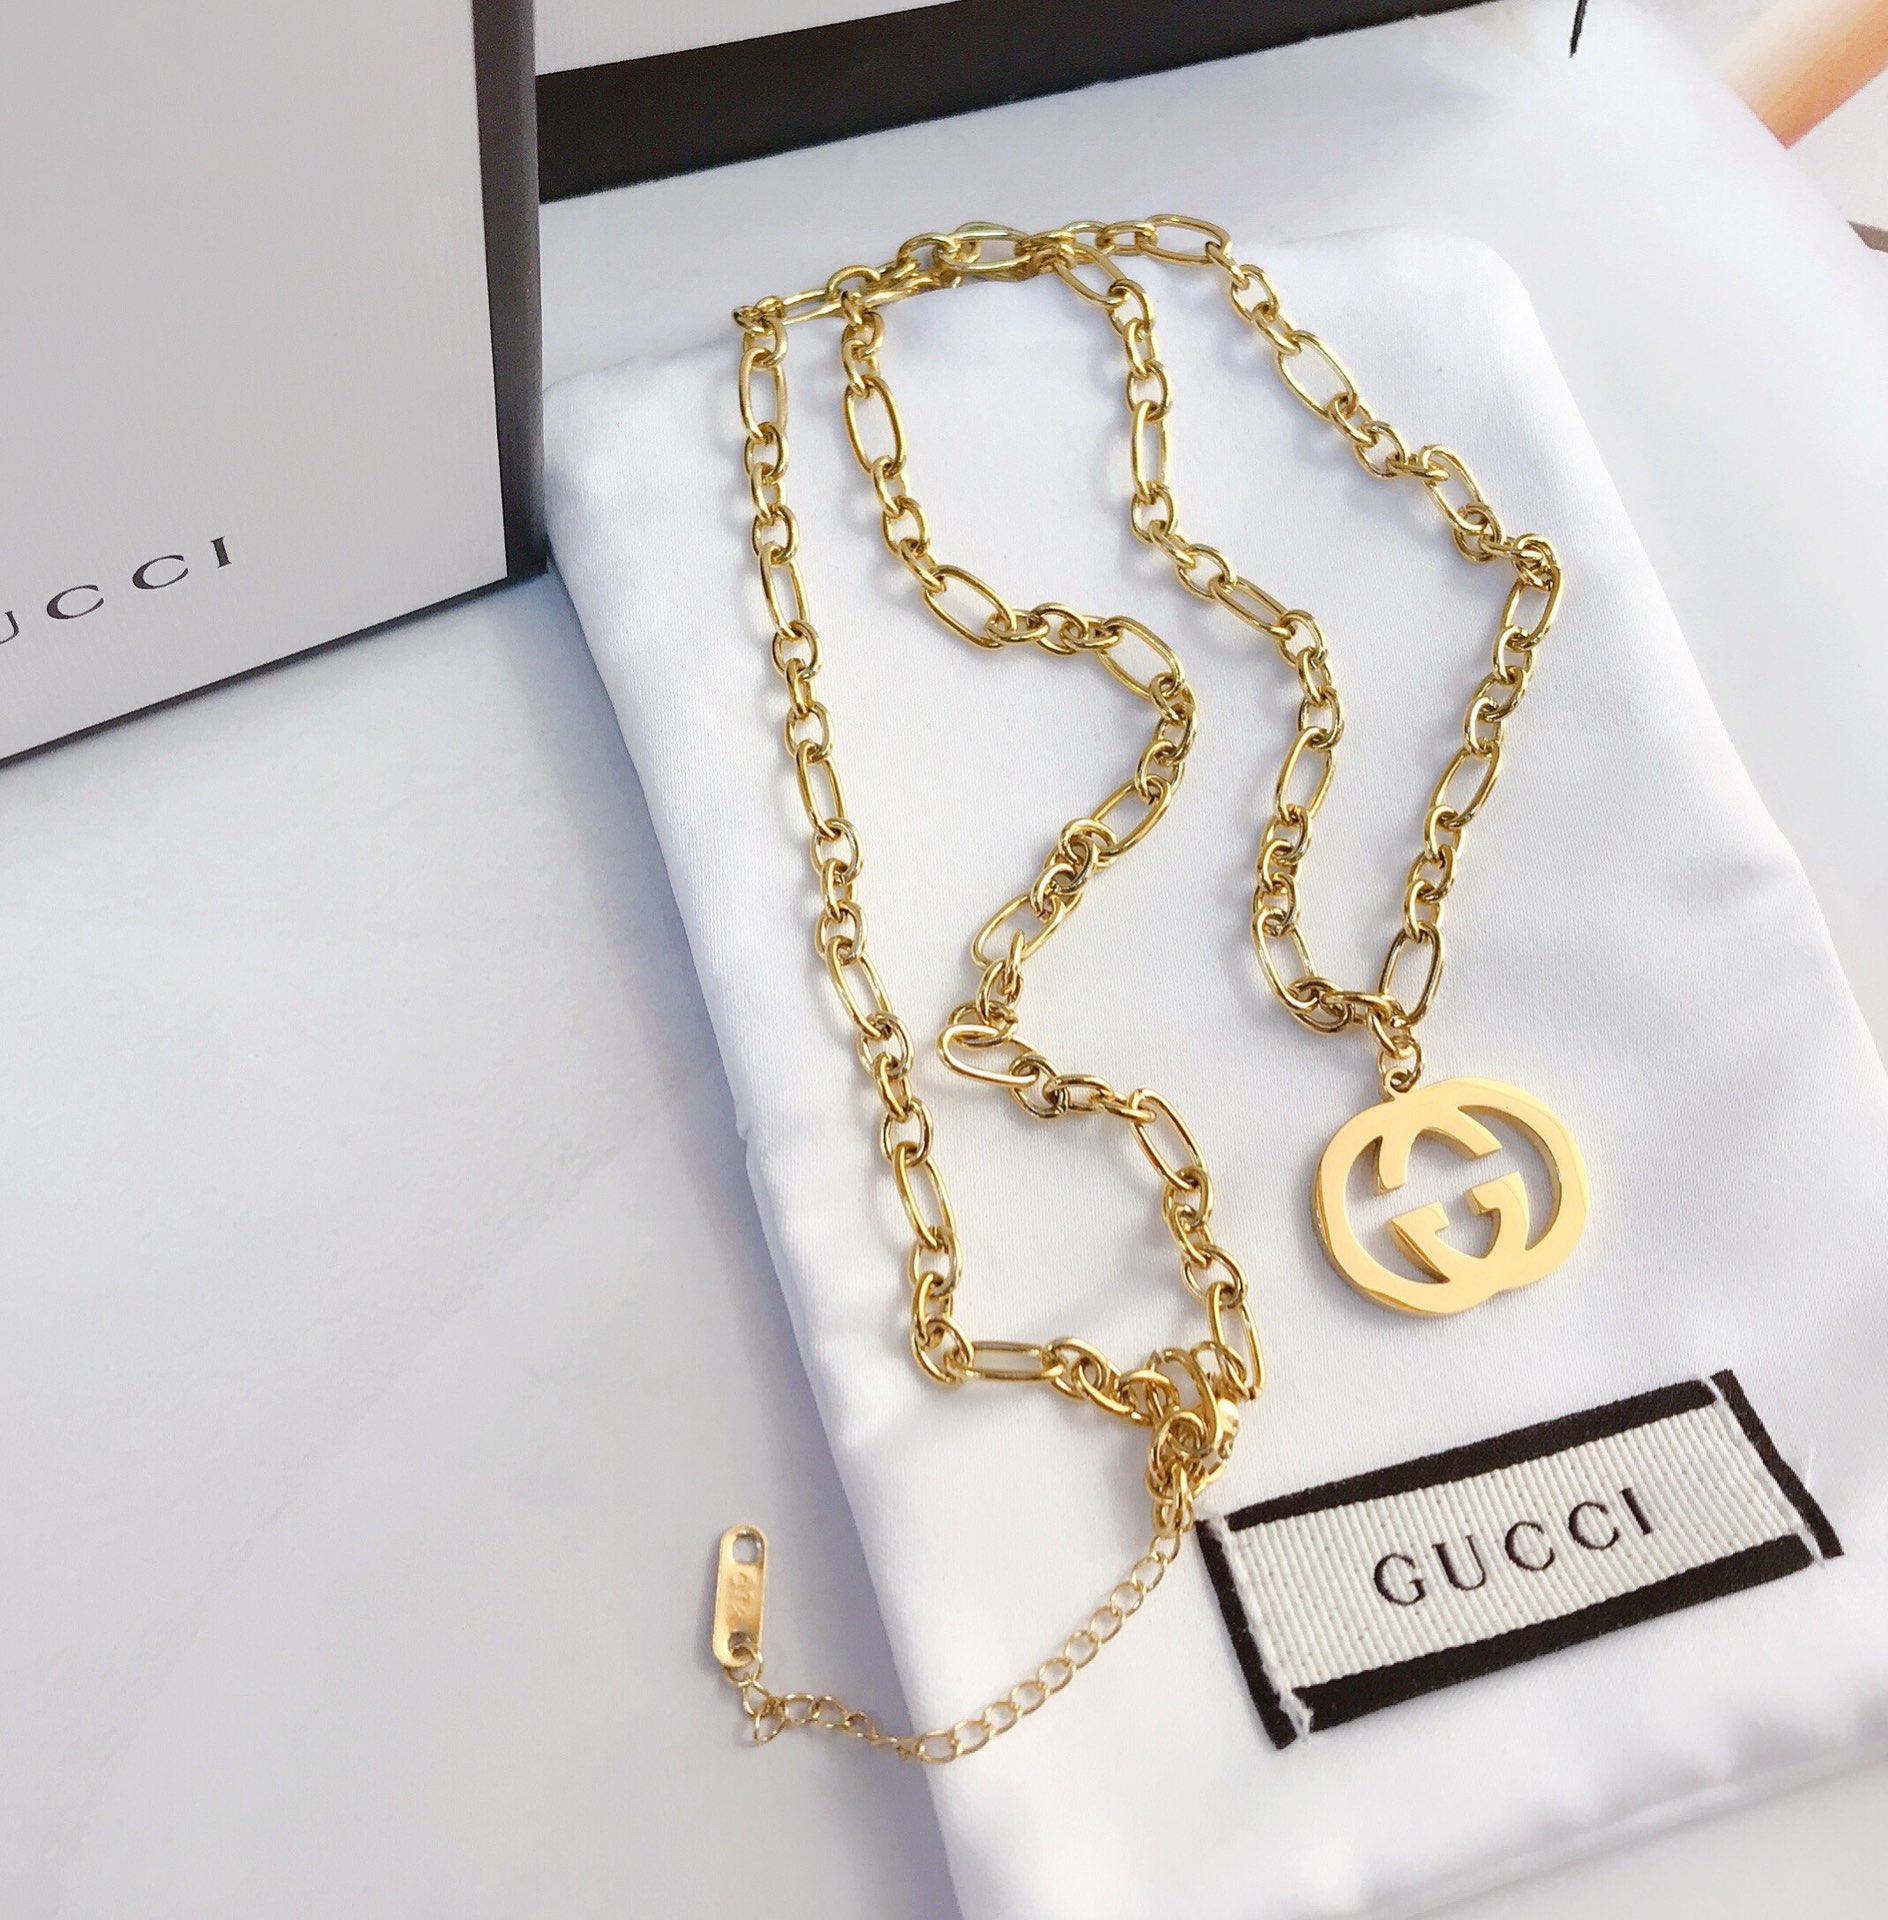 X008 Gucci necklace 110324